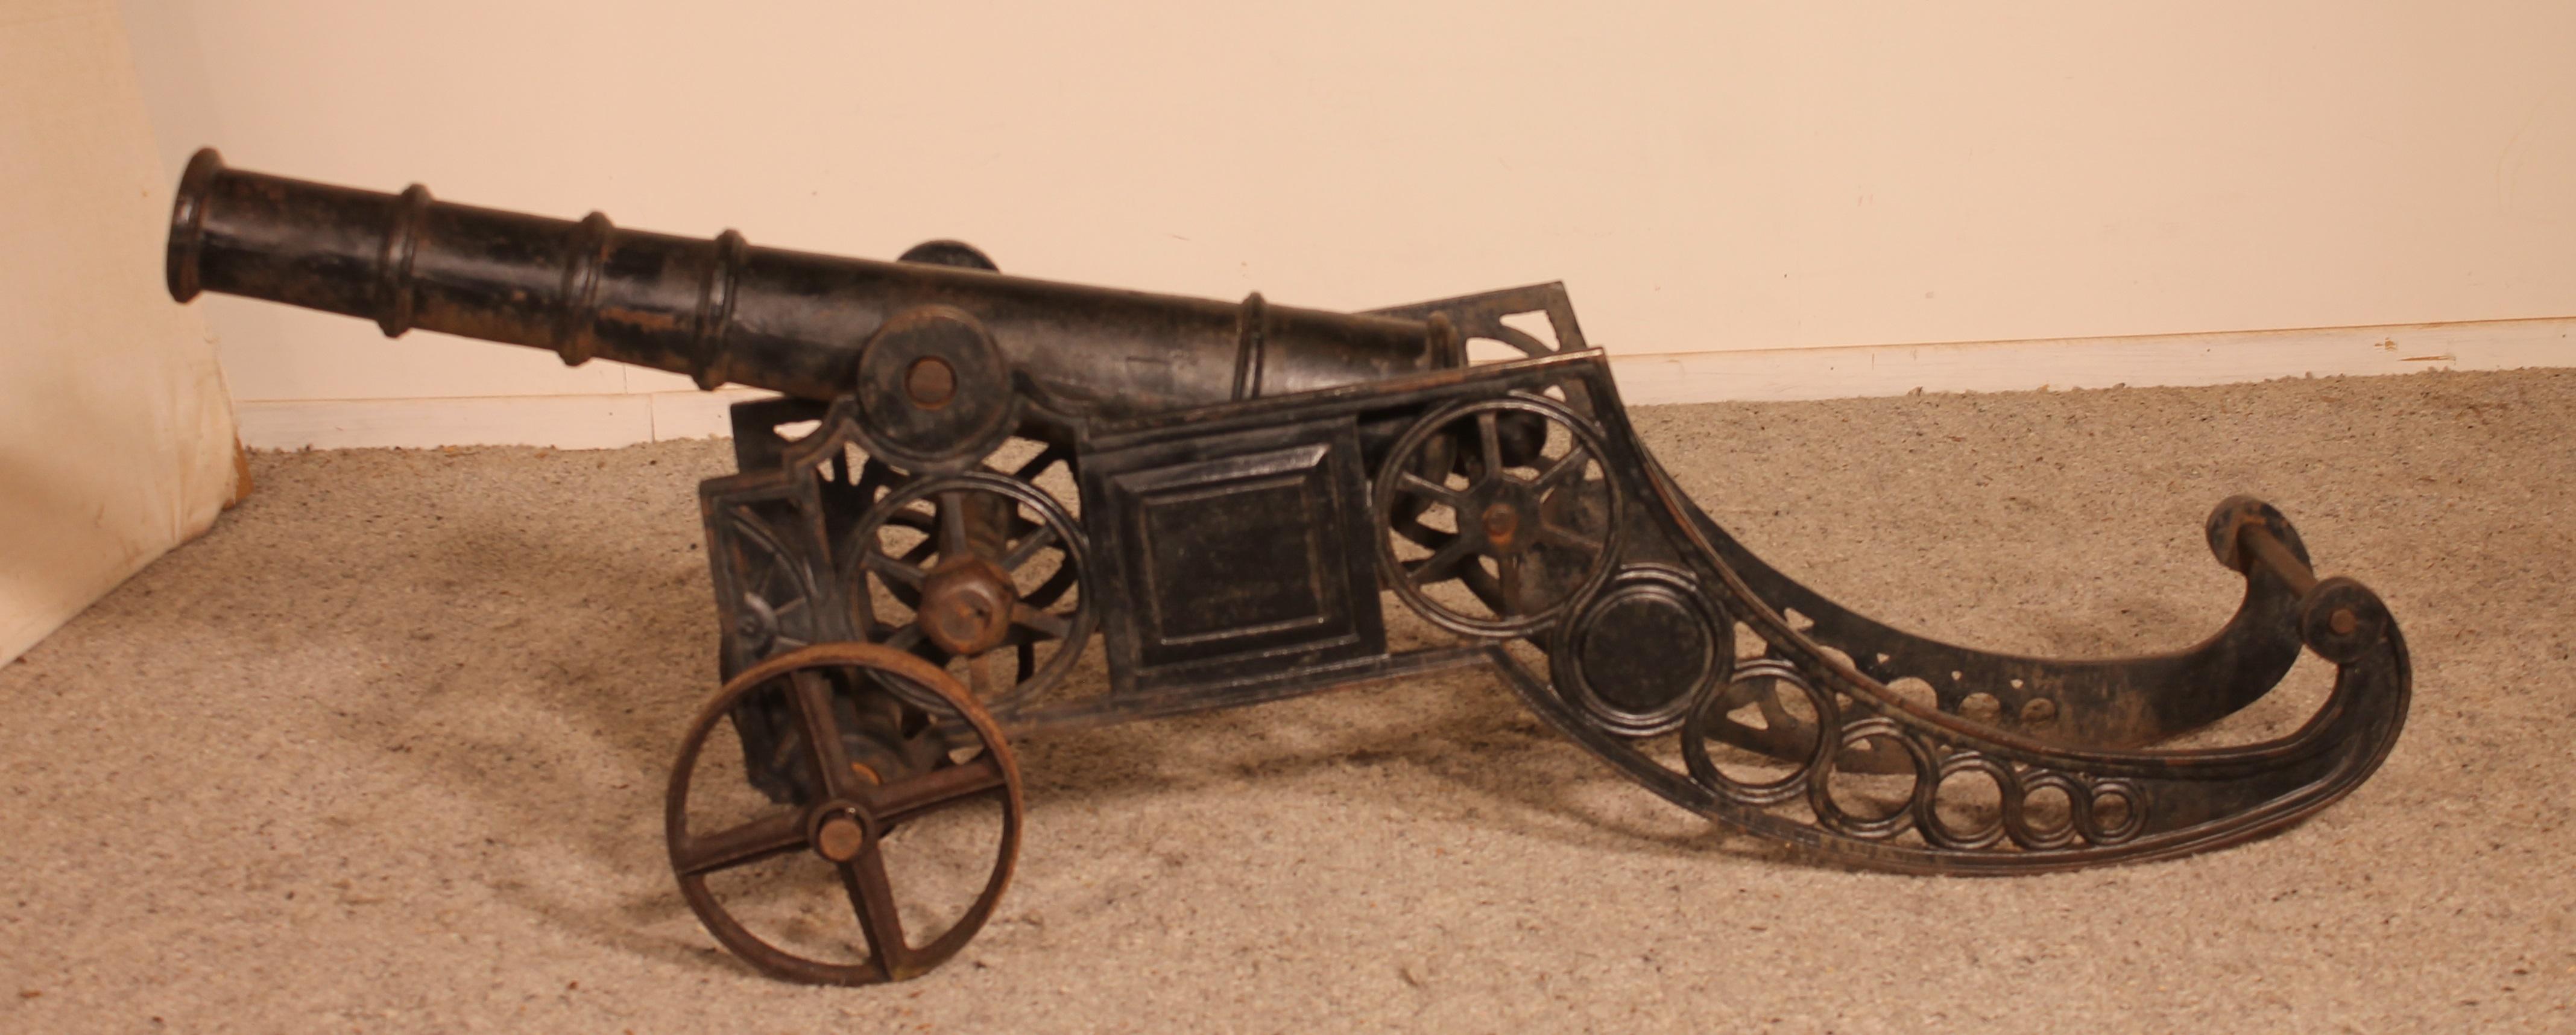 Elegant late 19th-early 20th century cast iron cannon from England.
We can find the inscription RM1 on its side
very decorative canon side that can be placed in an interior decoration, but also in a garden
Superb patina and in very good condition.